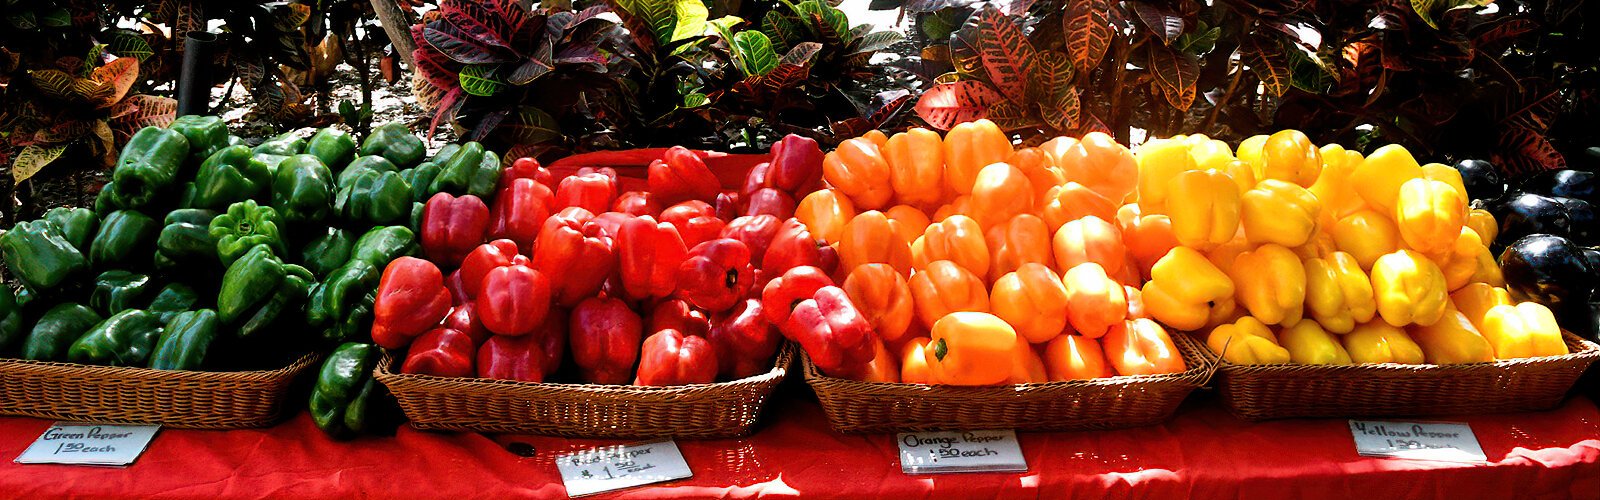 With lots of freshness and color appeal, these bell peppers are just a sample of the farm fresh produce at the Saturday Morning Market in St. Petersburg, currently located at Williams Park for the summer until August 26th.